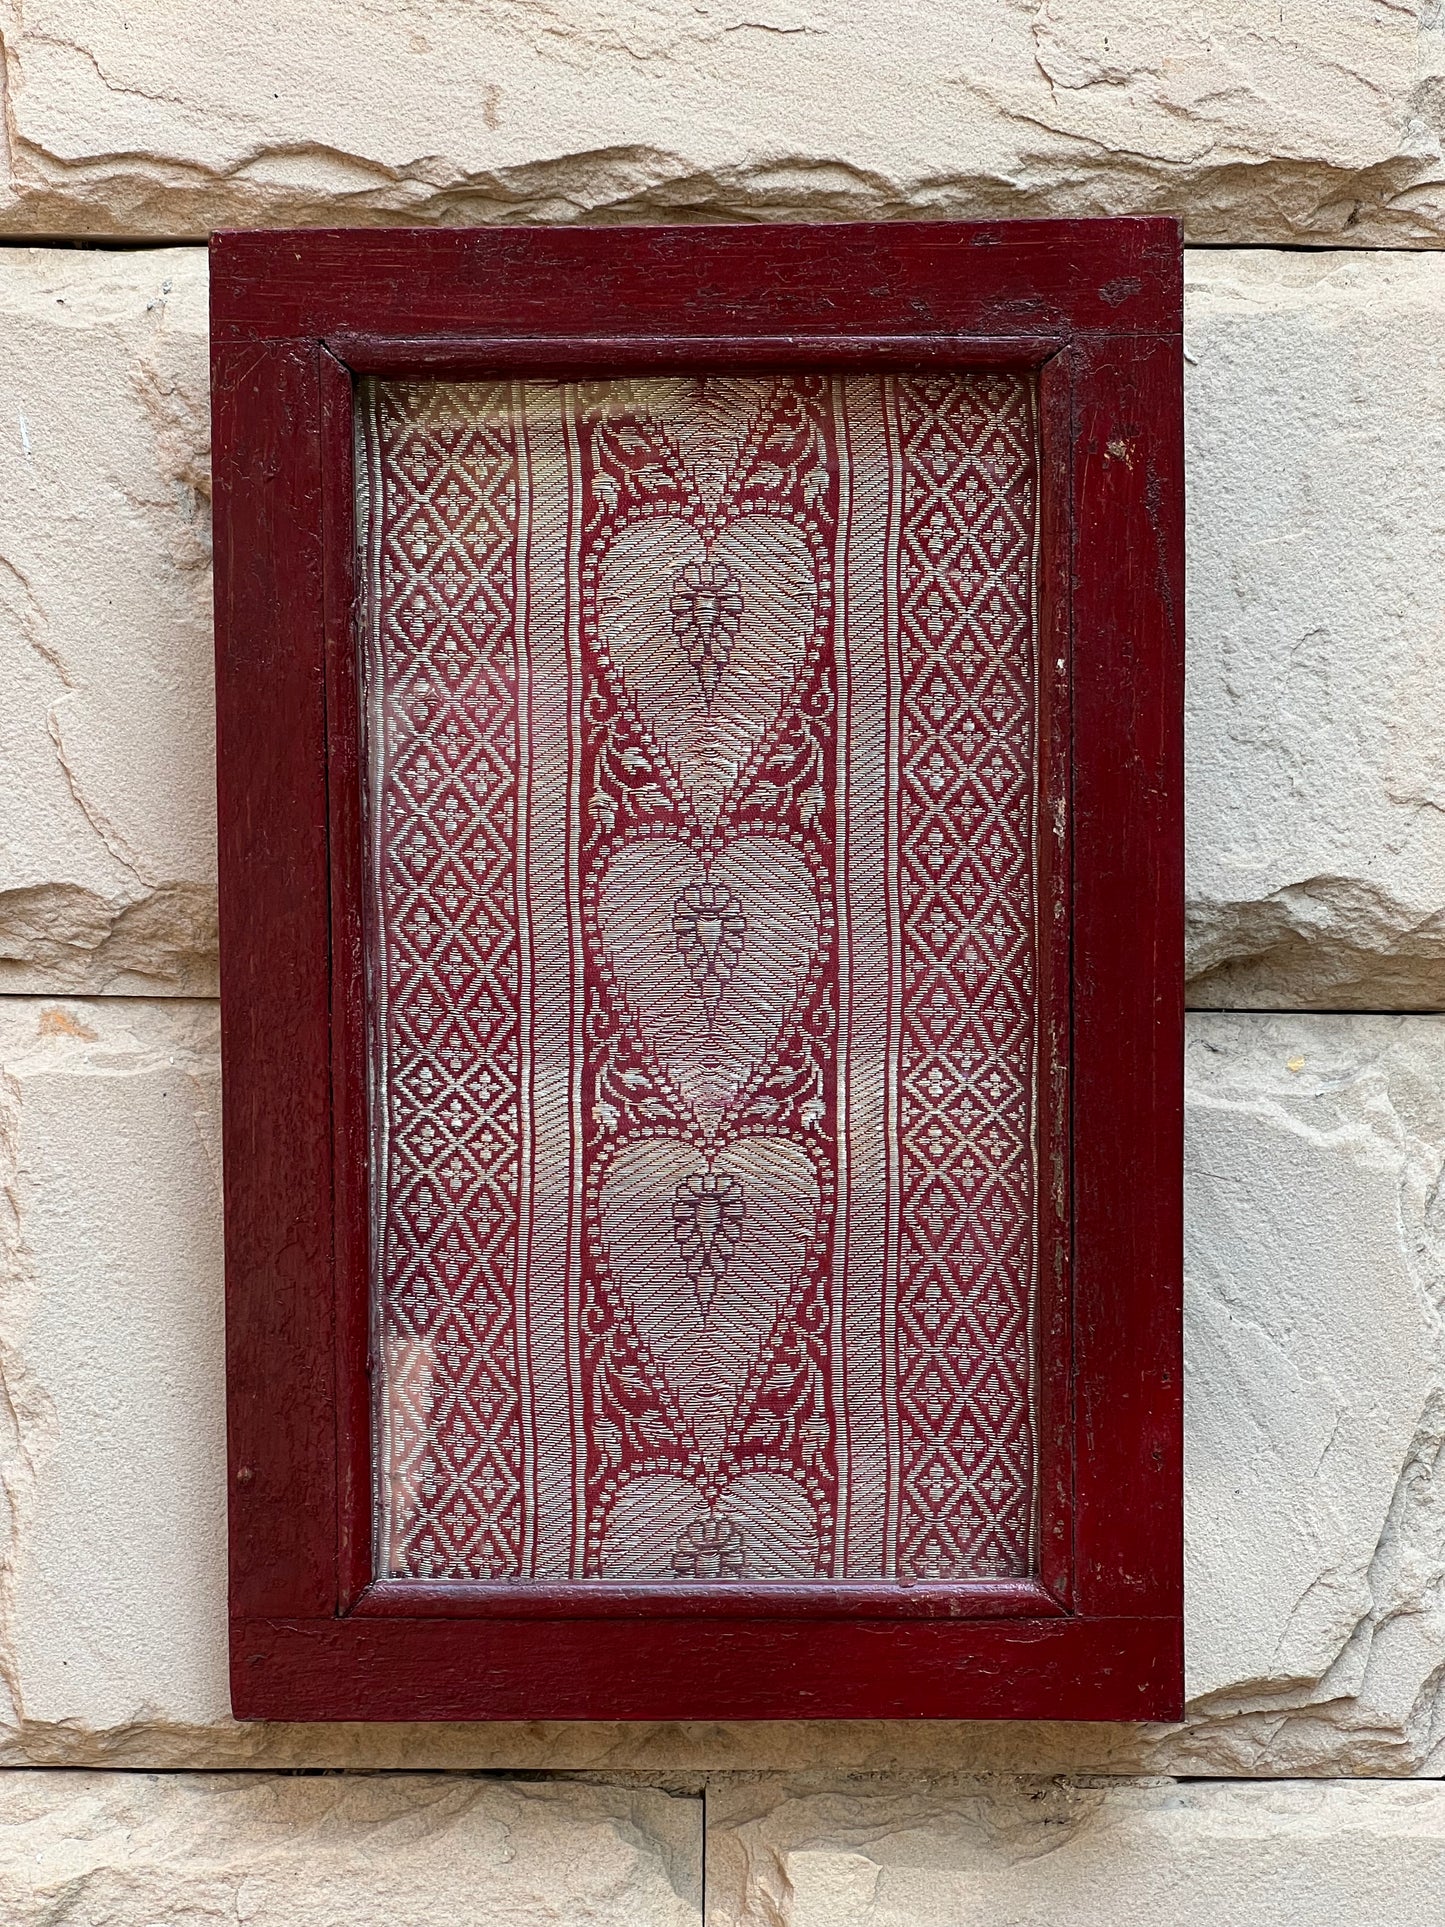 Image of Traditional and Elegant Red Frame with Old Banarasi Patch.  The Source India is an Indian Handicraft, Home Decor, Furnishing and Textiles Store. Based out of Hauz Khas Village New Delhi, each piece is carefully procured to allow the enhancement of India's Culture.